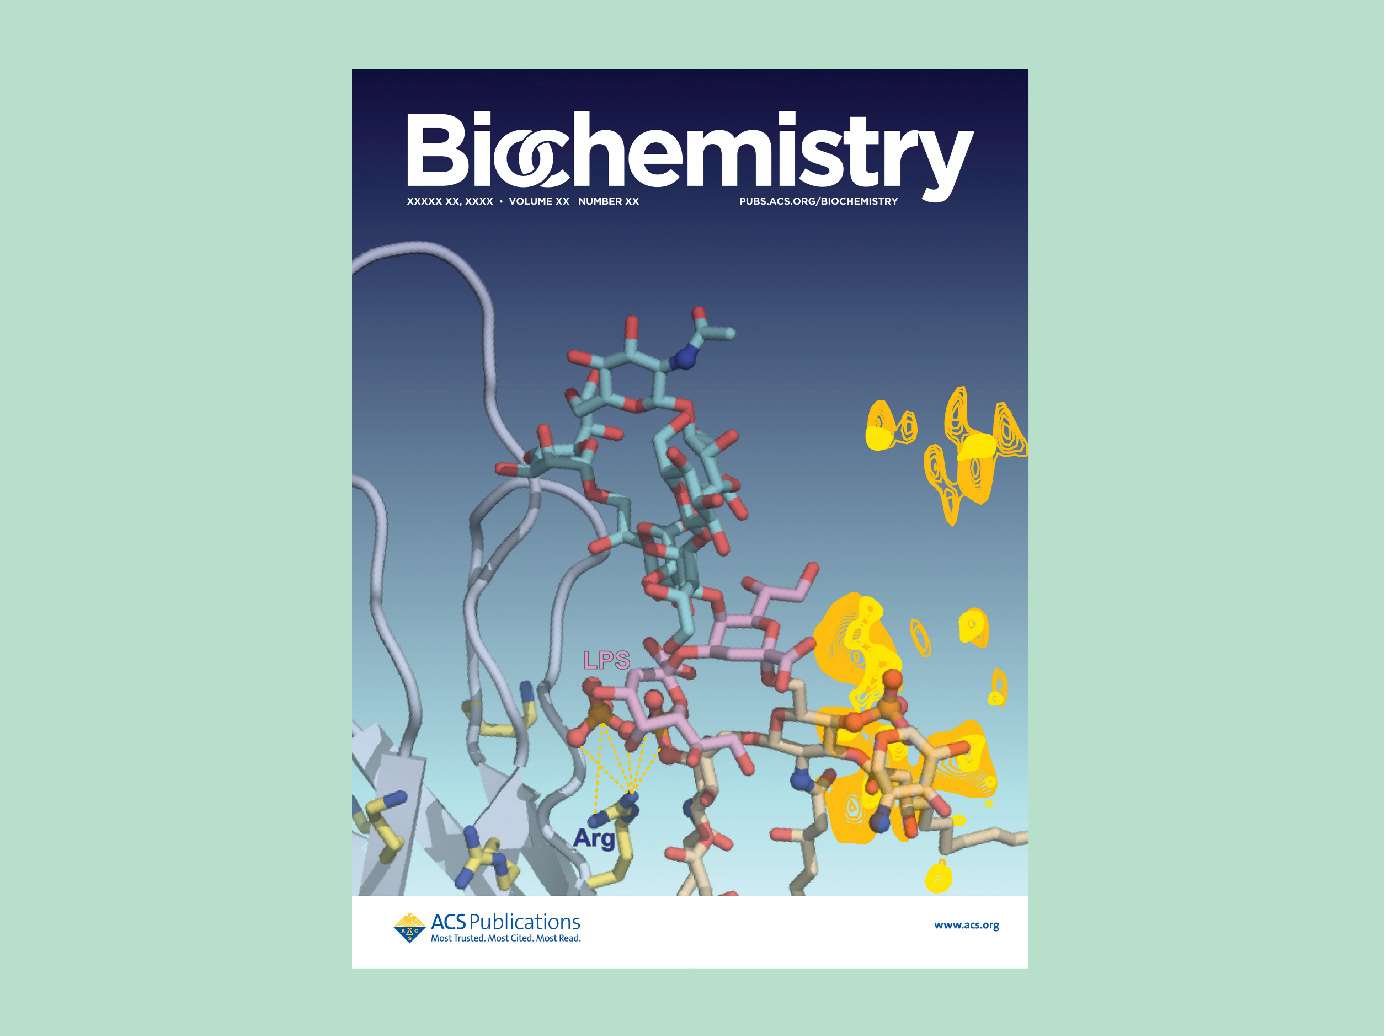 cover image from Biochemistry journal